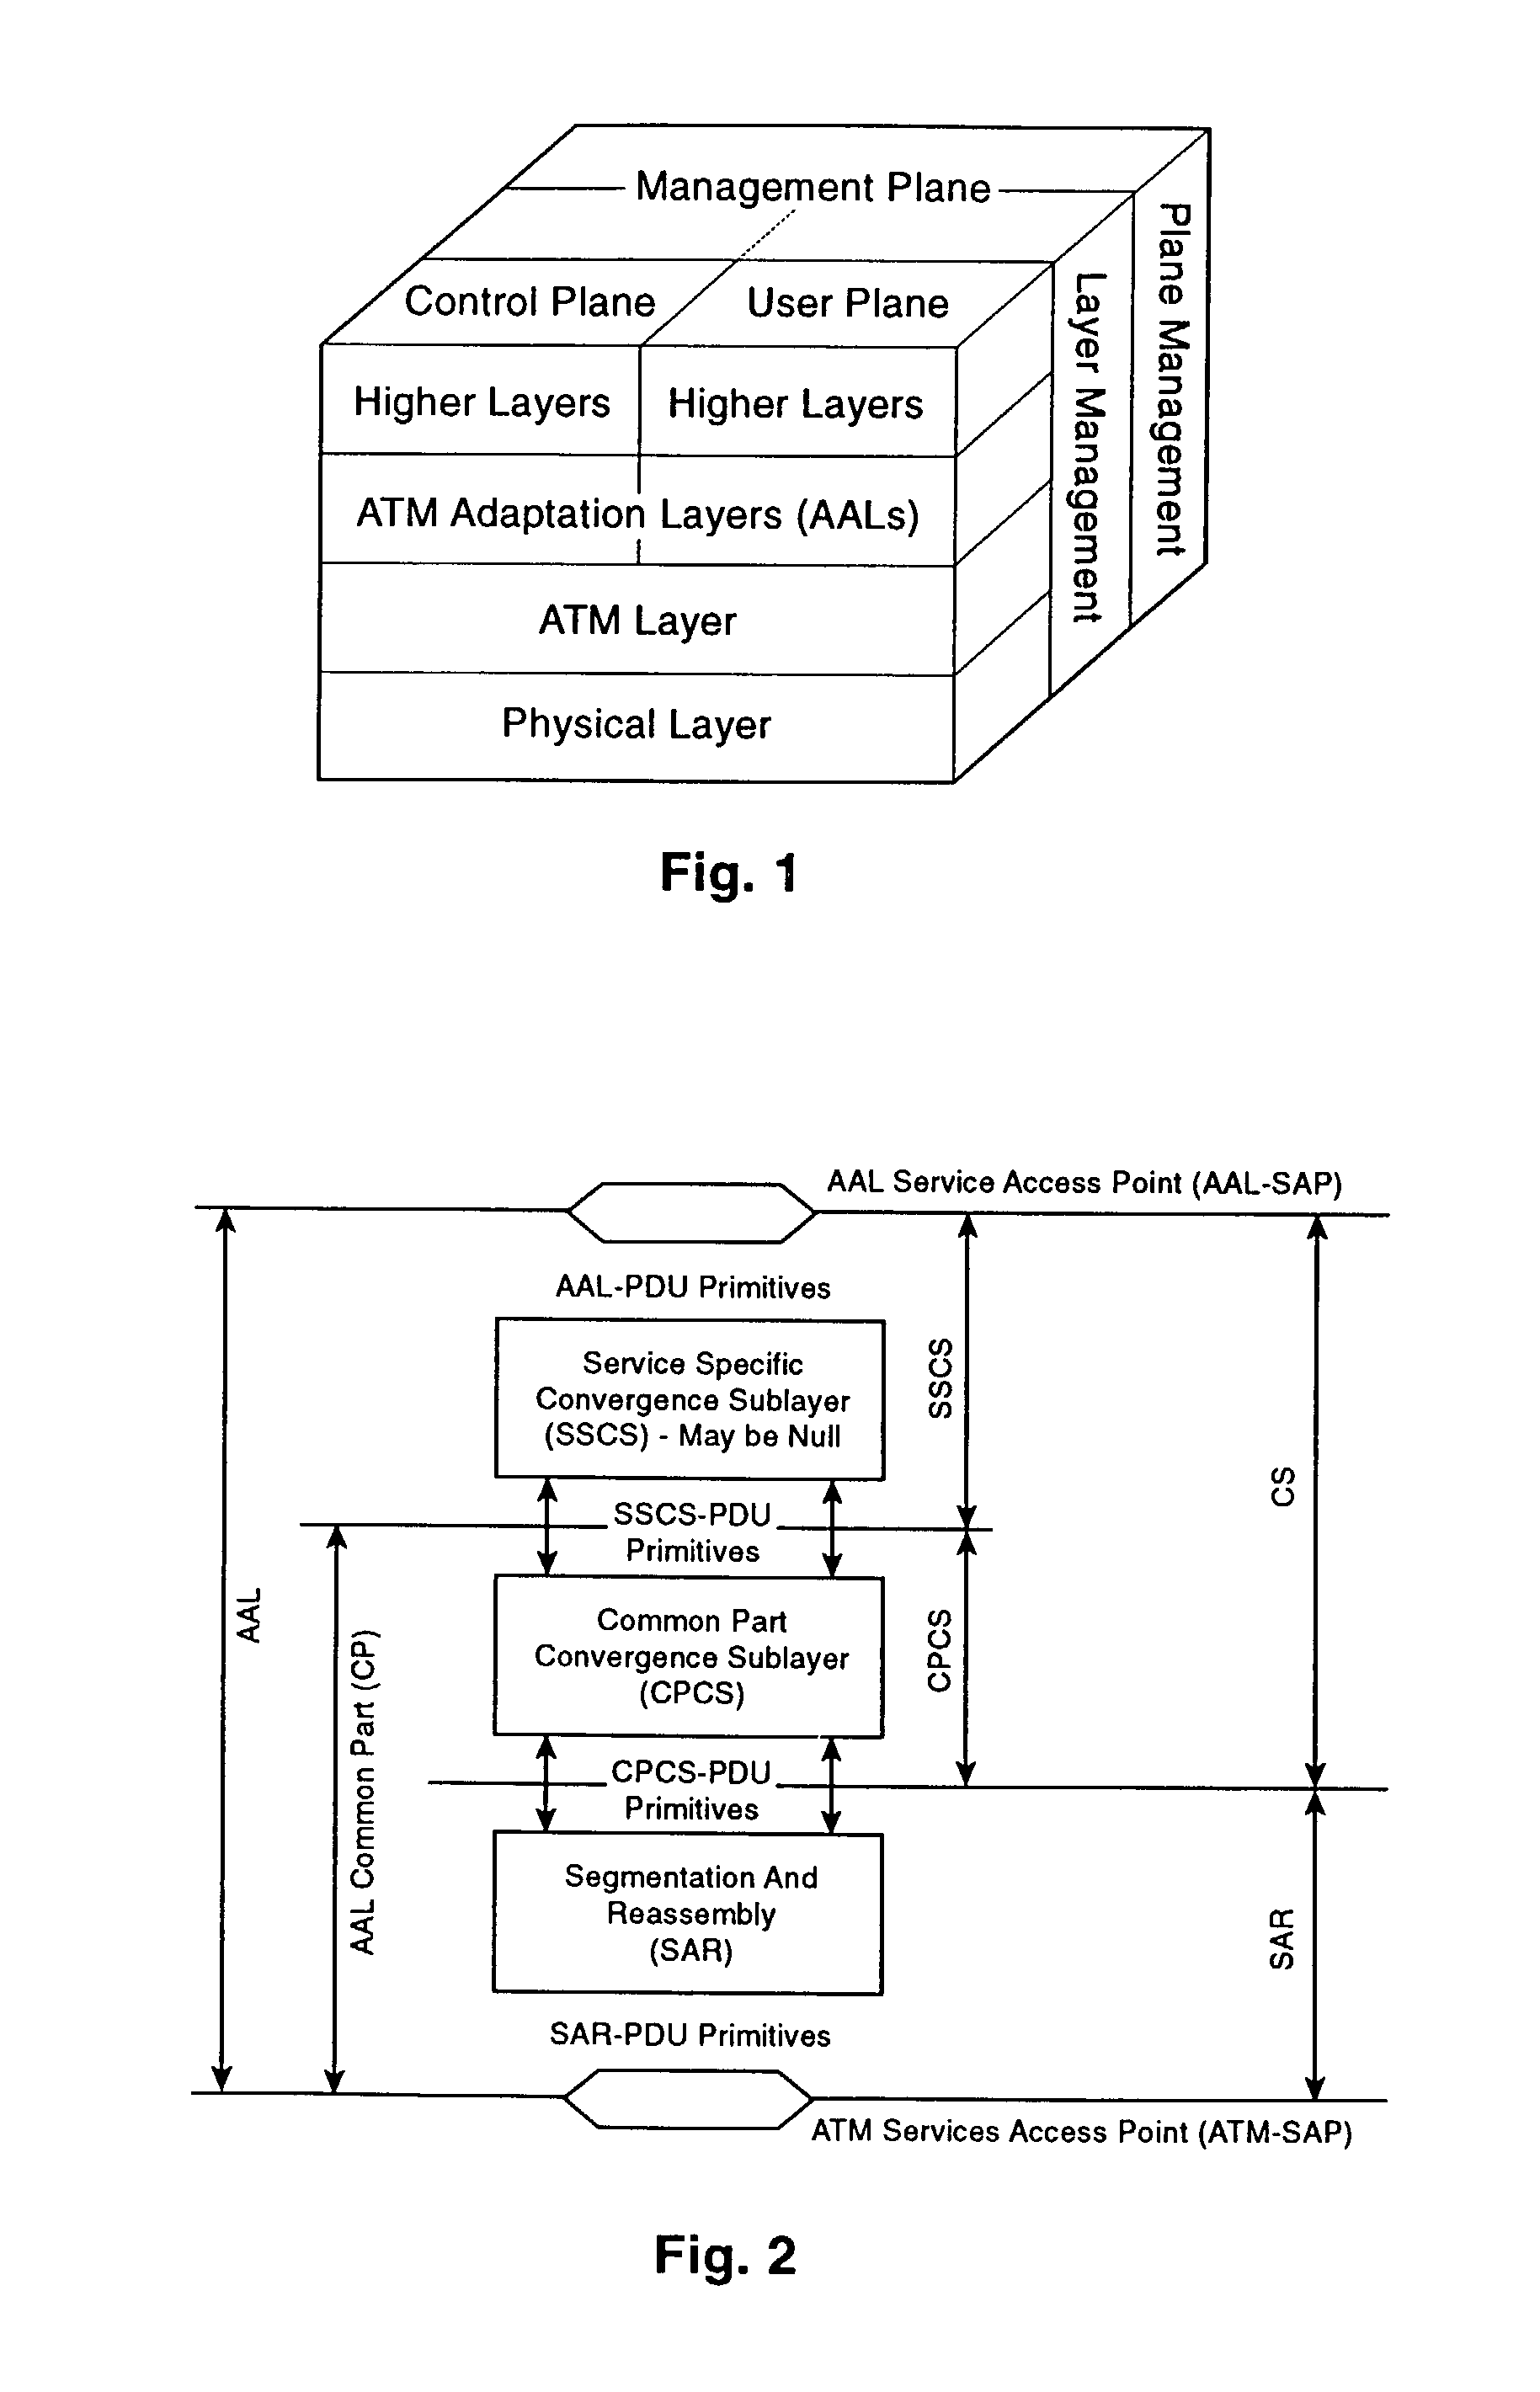 ATM adaption layer traffic scheduling